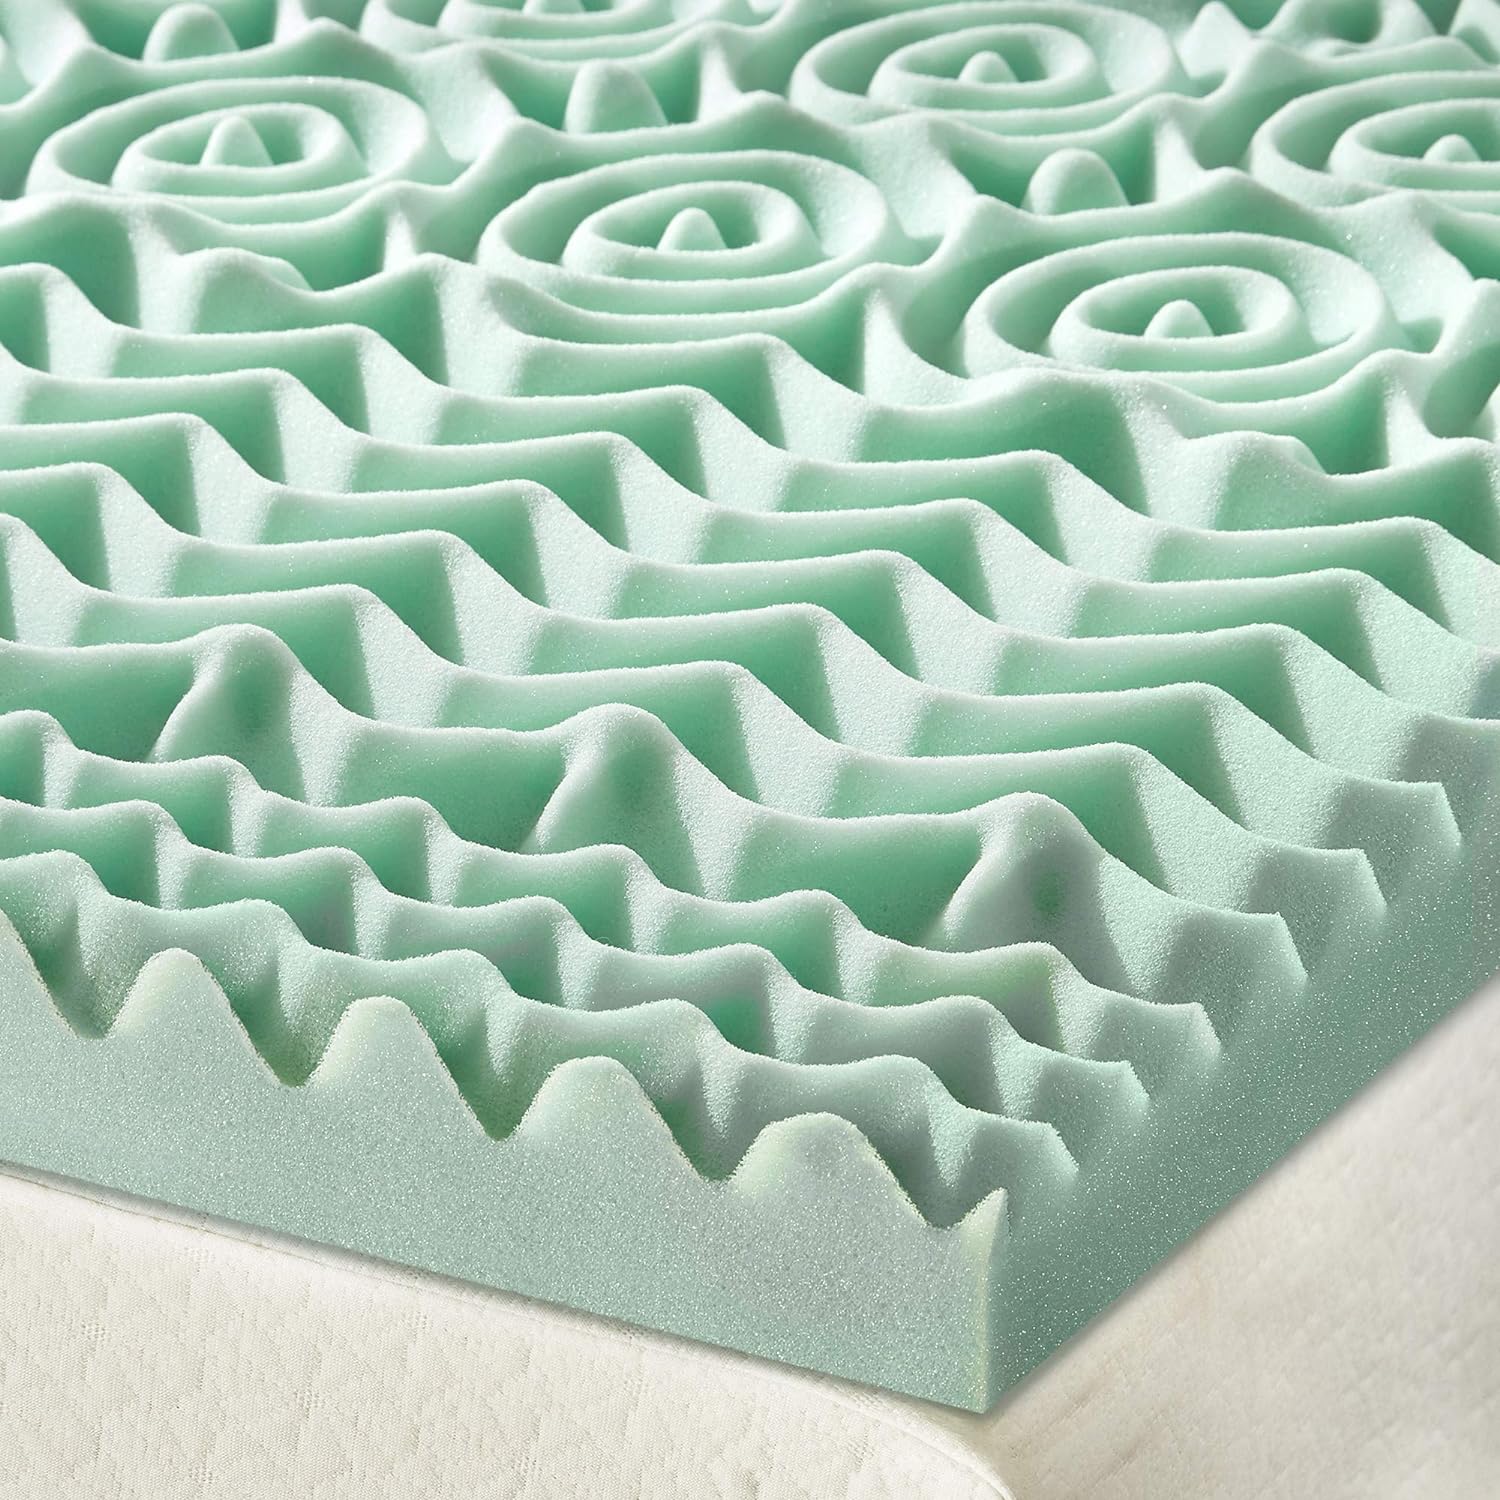 2 Inch 7-Zone Memory Foam Mattress Topper With Calming Aloe Infusion